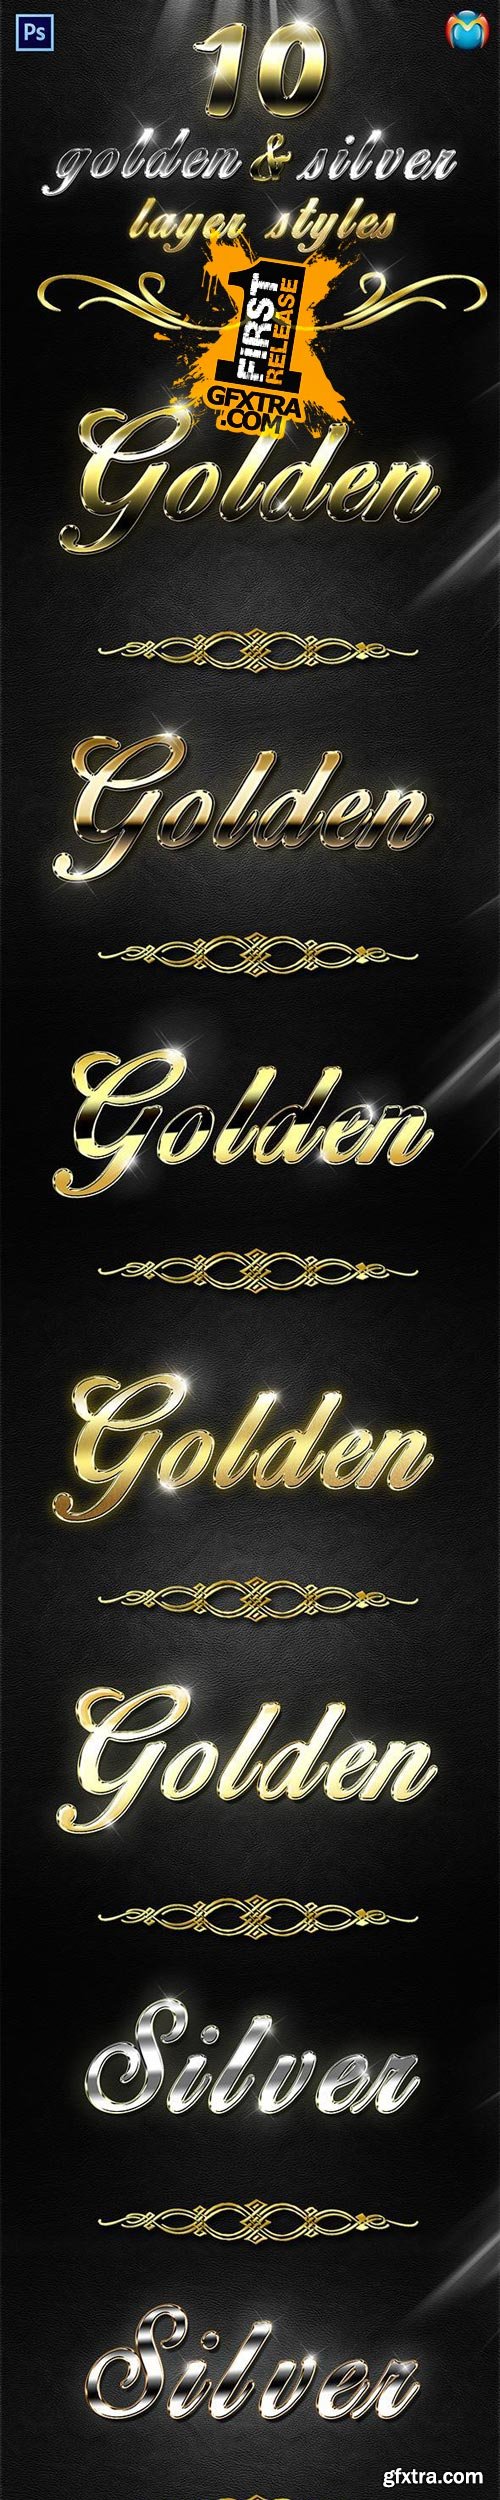 GraphicRiver - Golden & Silver Layer Styles V.2